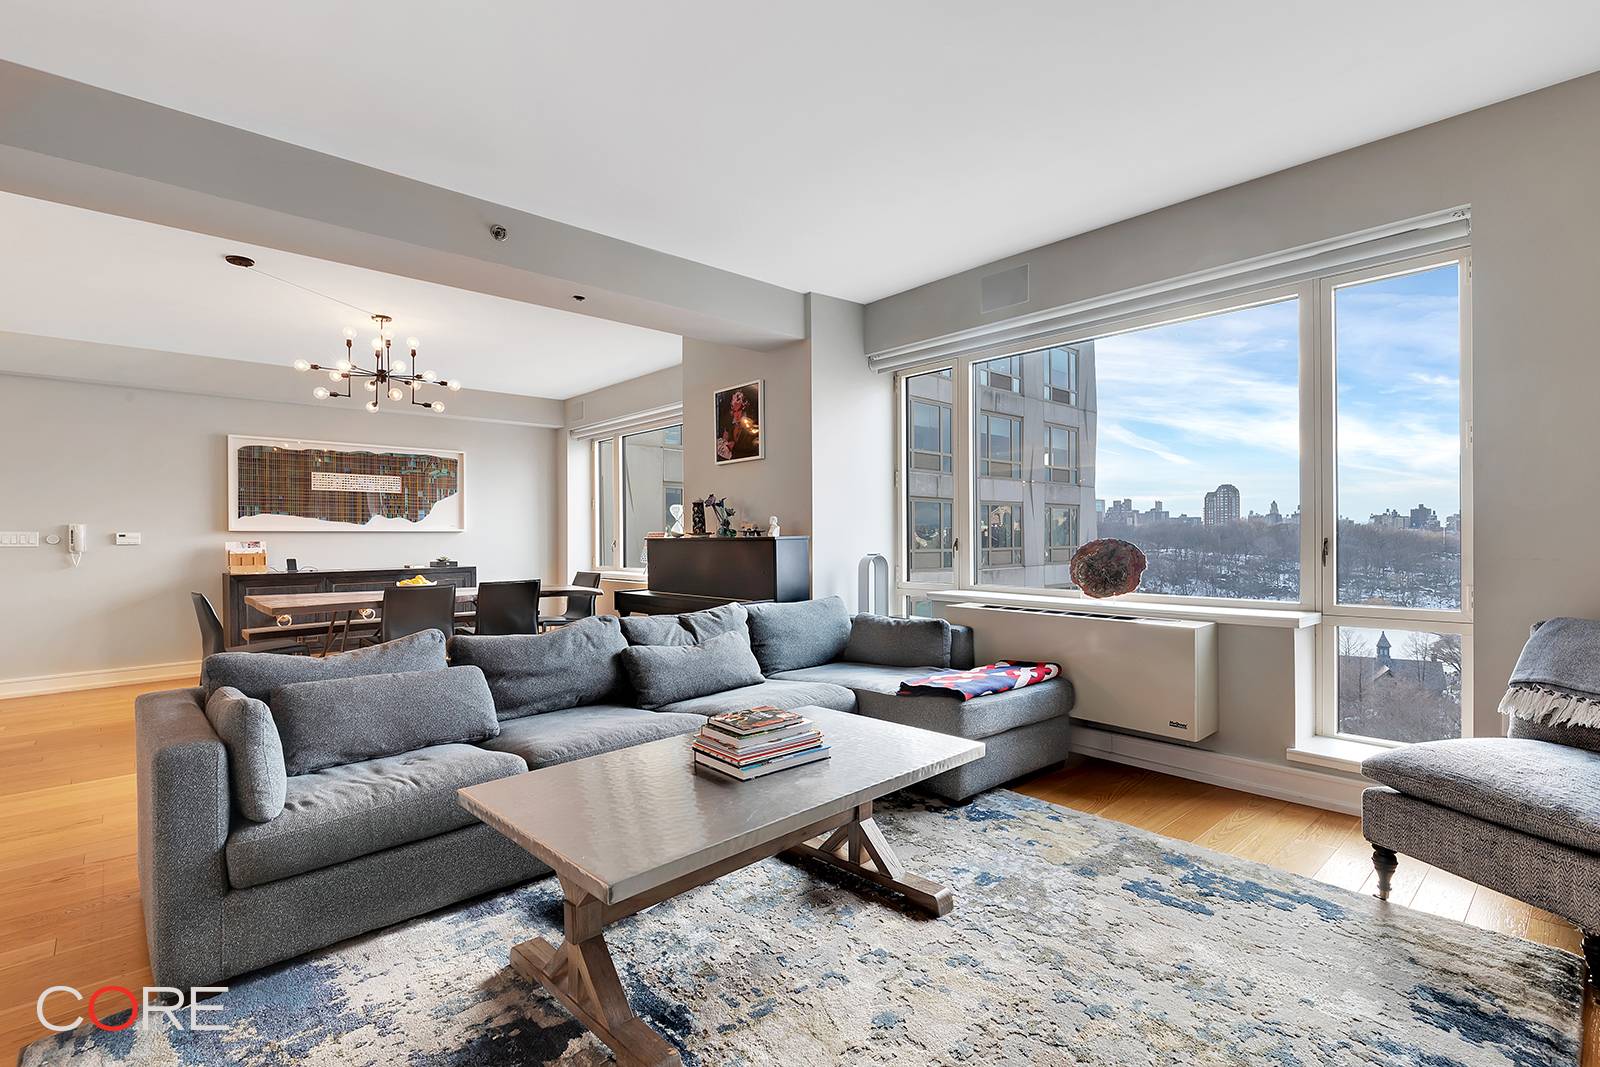 One of the largest layouts available at One Museum Mile, this Central Park facing three or four bedroom condo offers the best in design, flexibility, space, view, and customization.